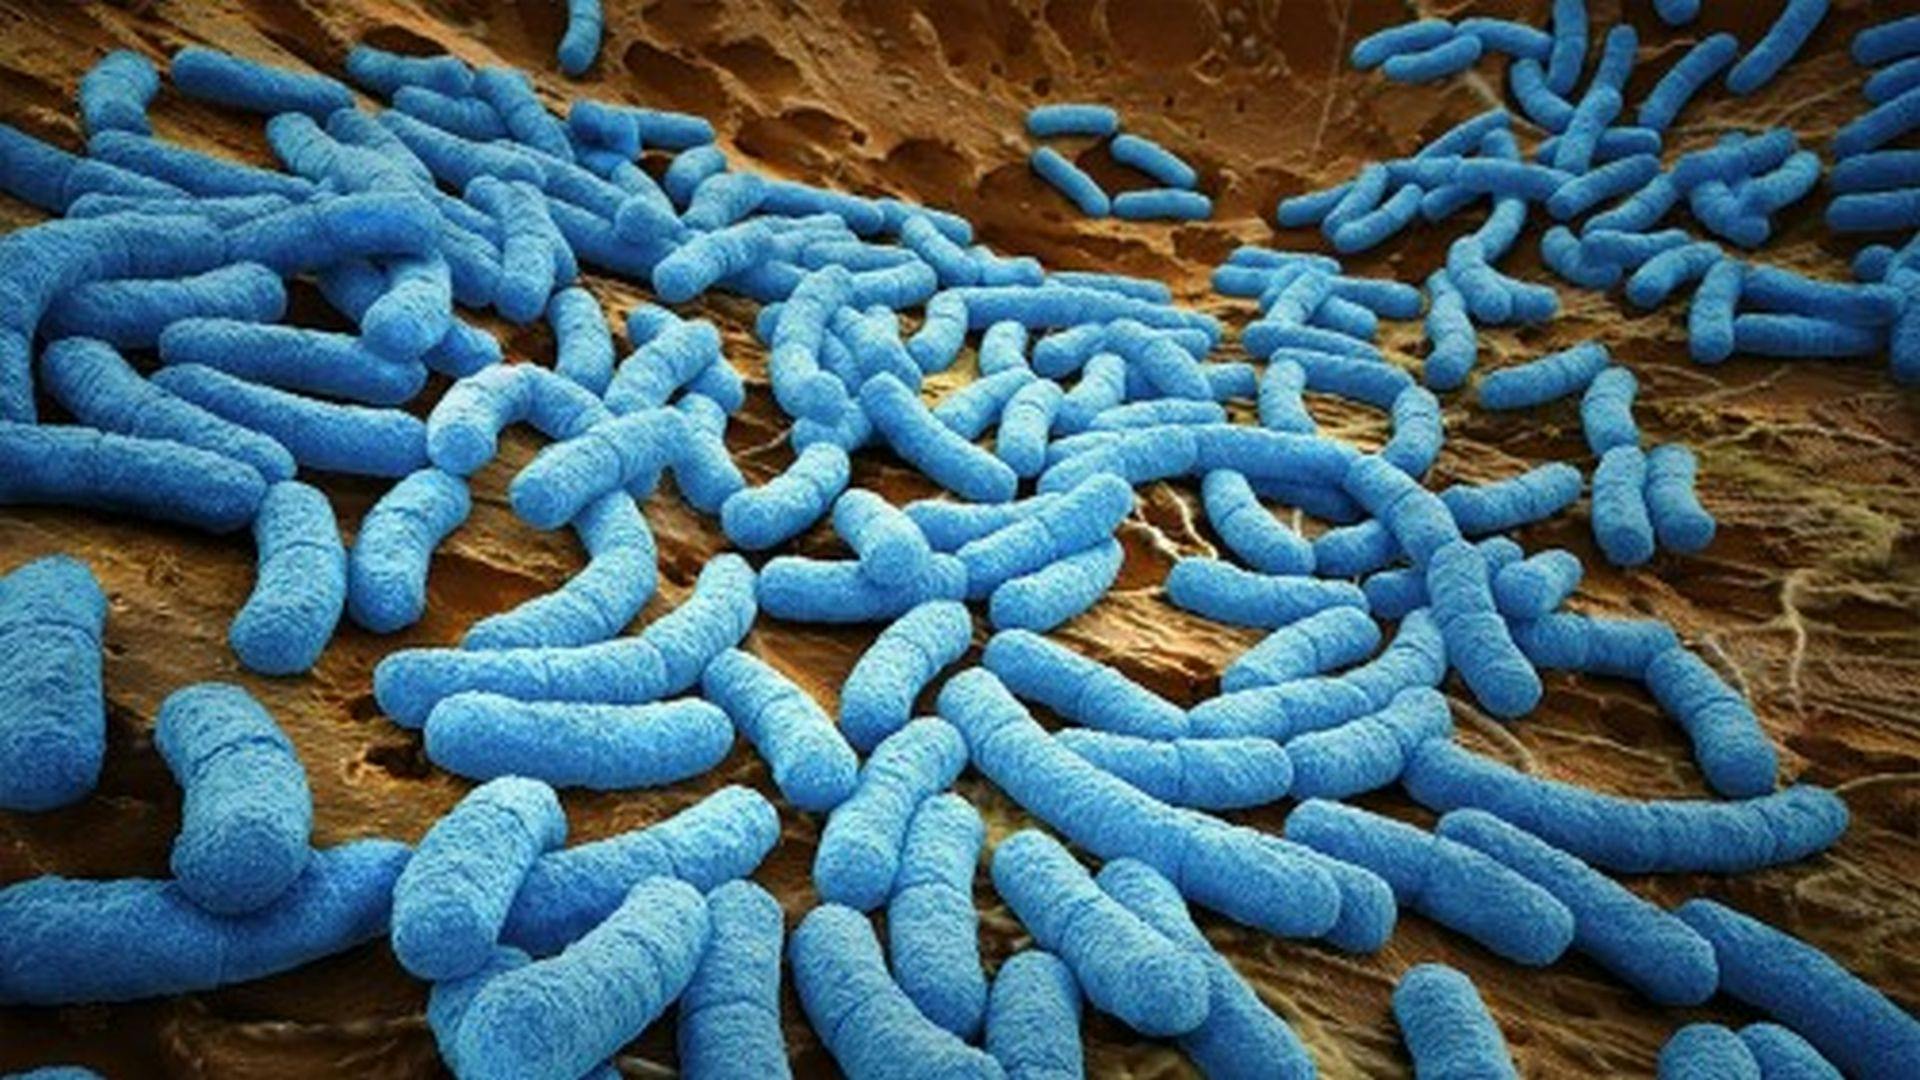 Superbugs Gang Up on Us, Fueled by Antibiotic Use, Nursing Home Study Suggests